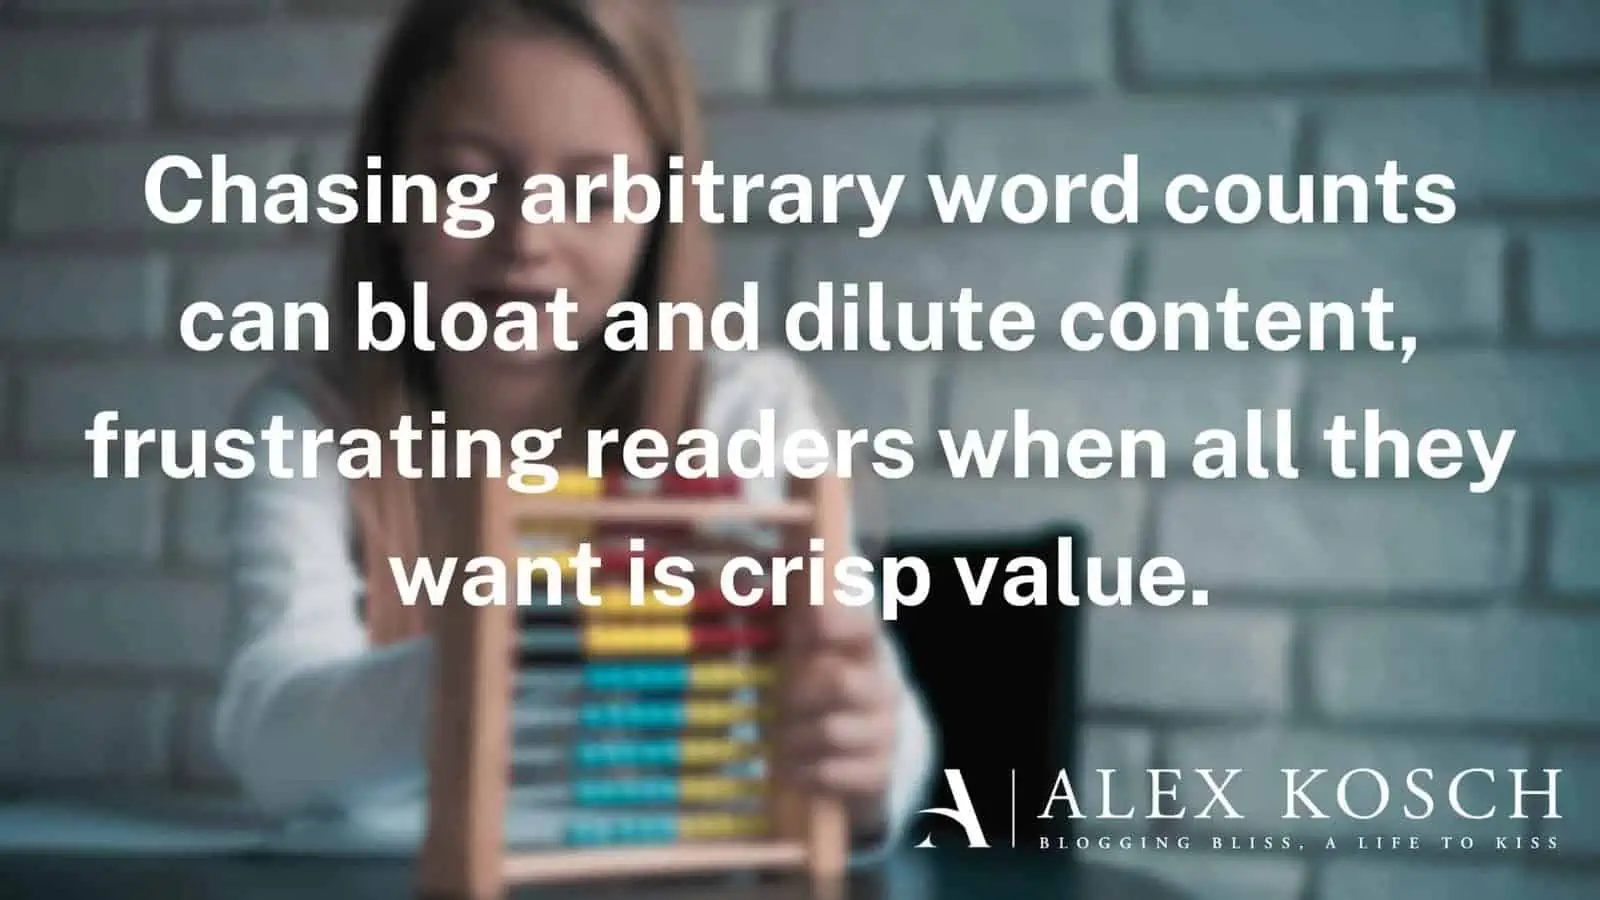 Chasing arbitrary word counts can bloat and dilute content, frustrating readers when all they want is crisp value.